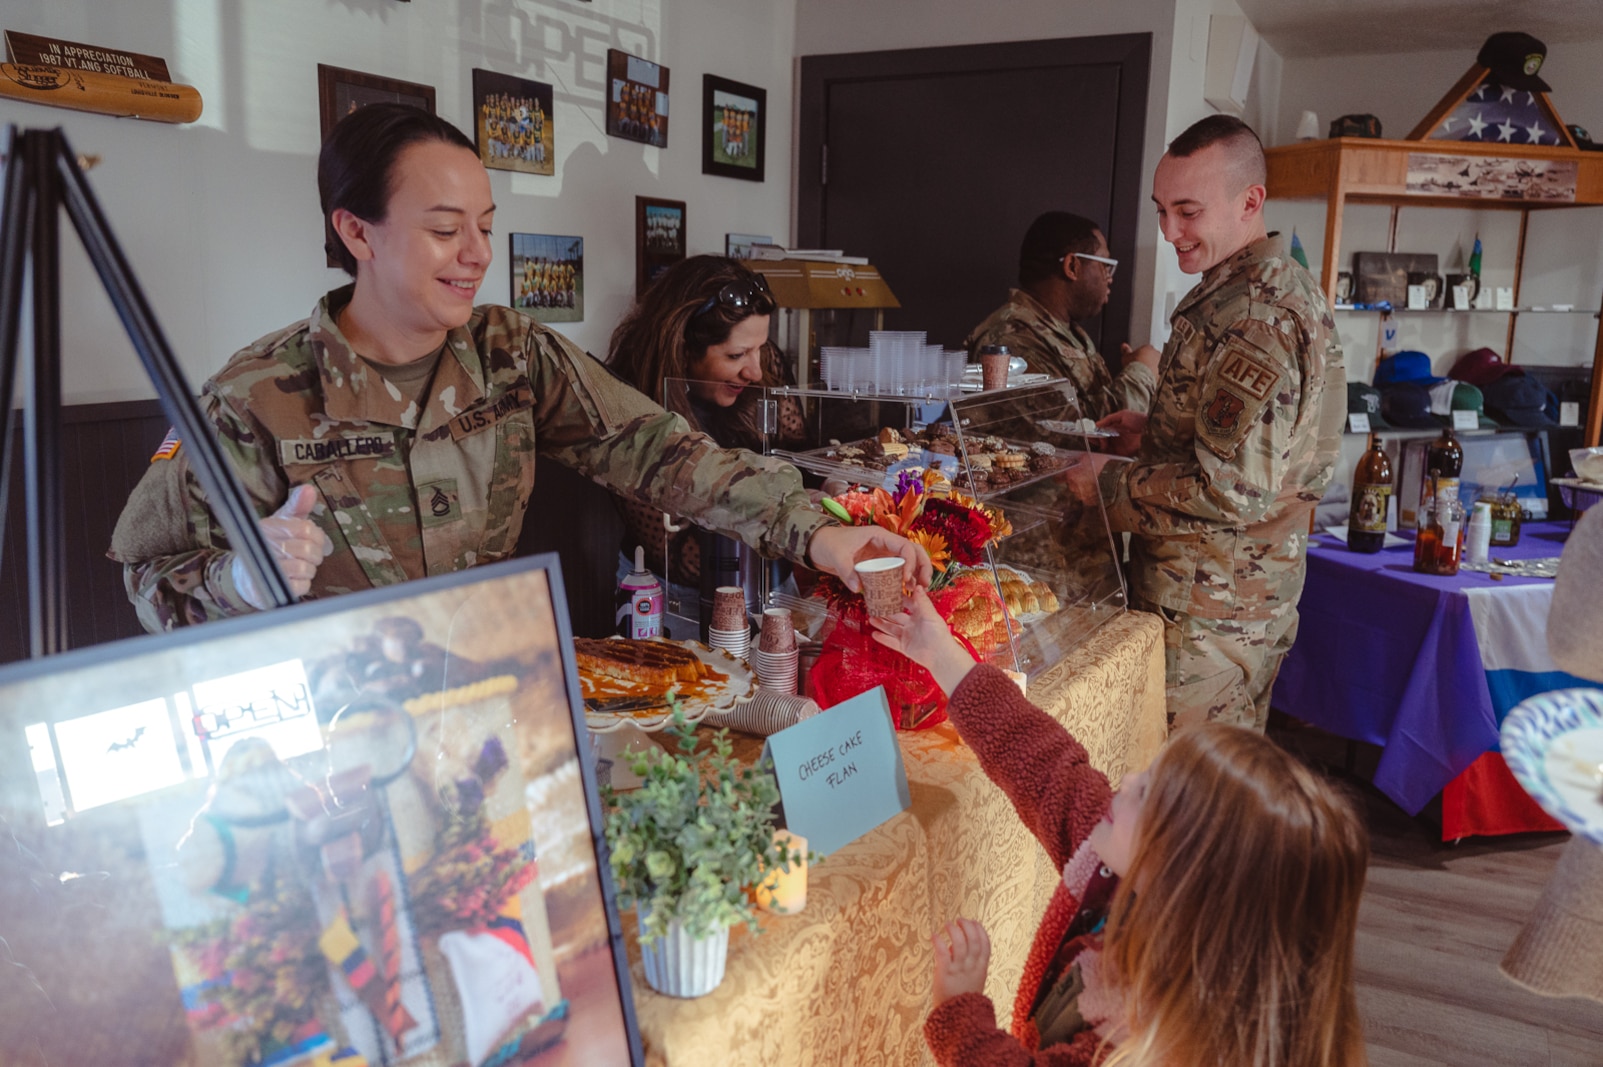 Photo of Service members and civilians serving food and drinks from around the world during a multicultural event at the Vermont National Guard Base, South Burlington, Vermont.